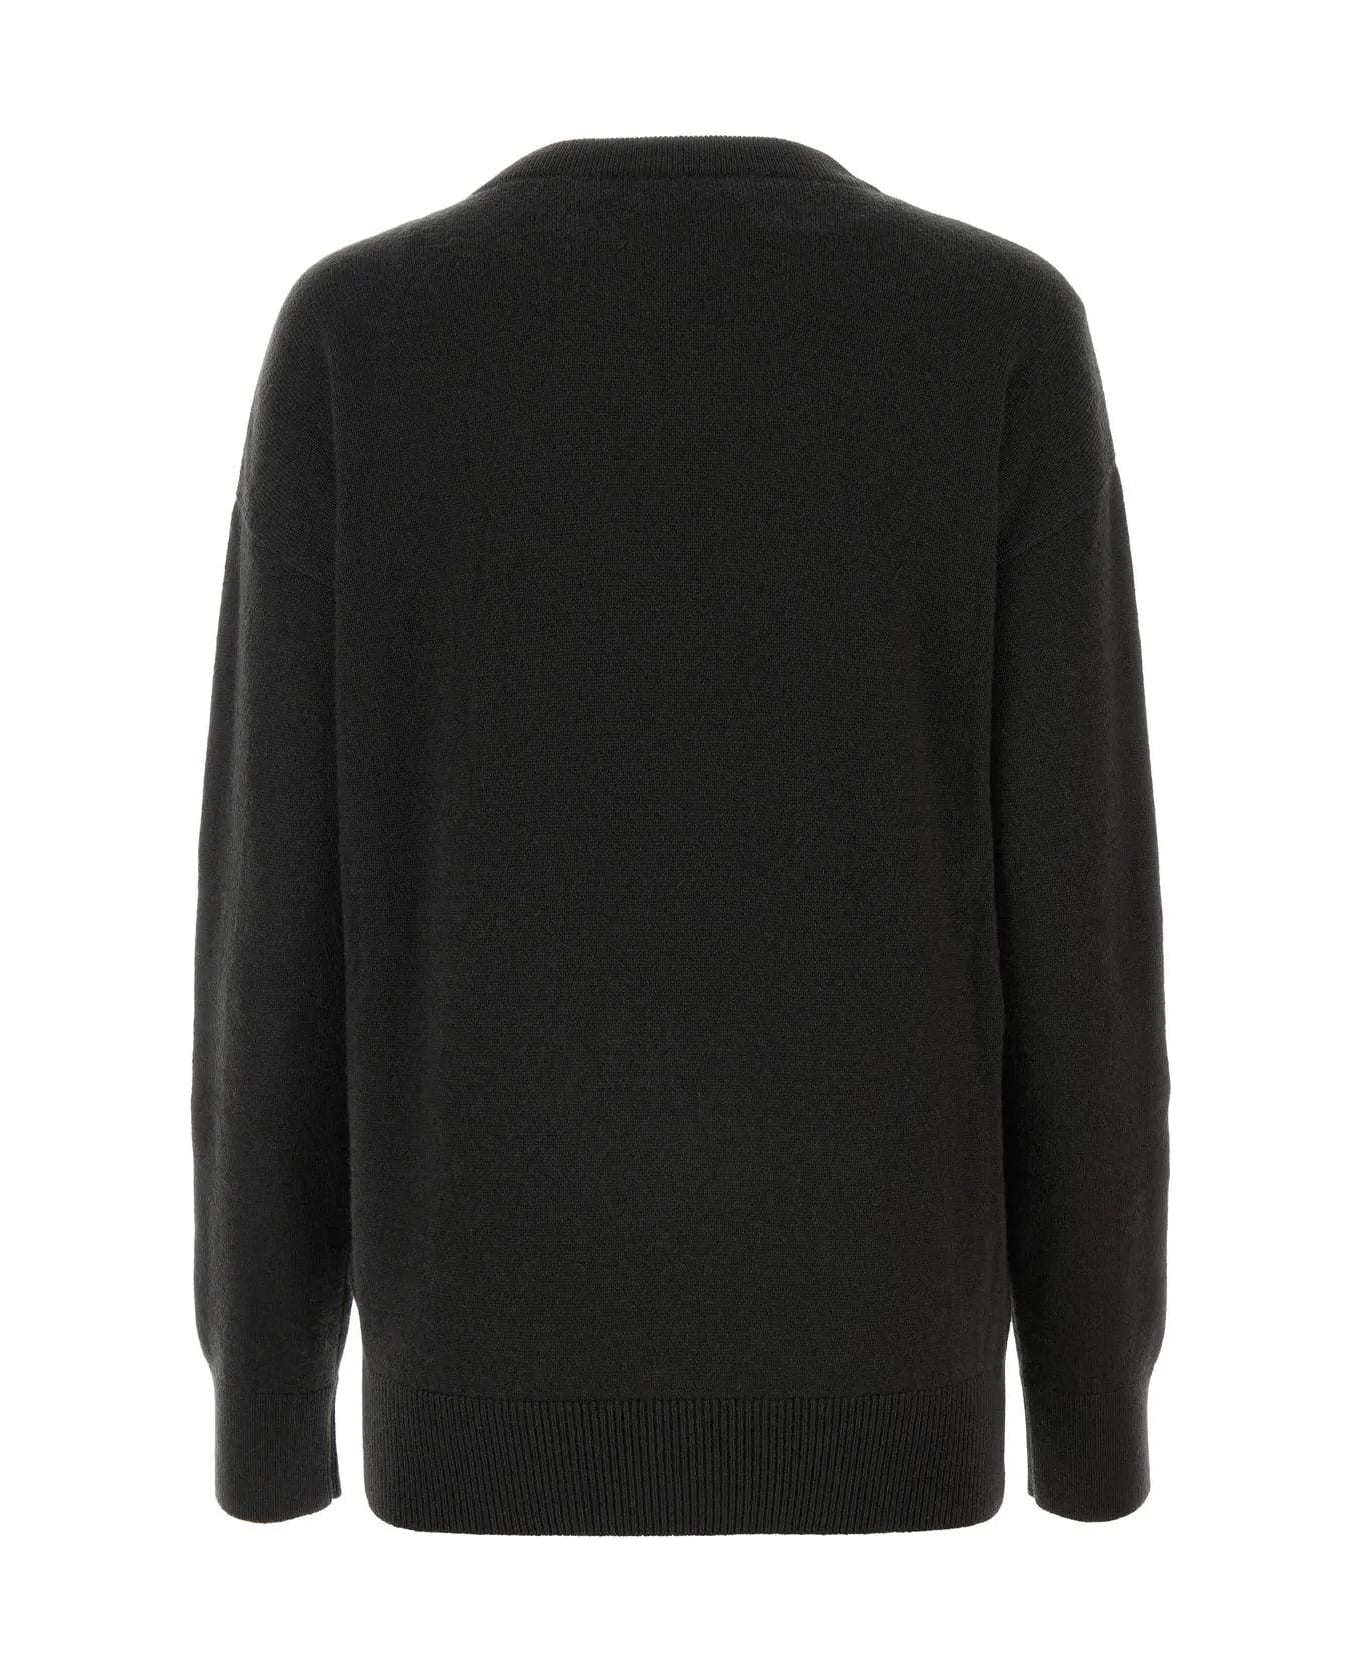 Burberry Anthracite Cashmere Sweater - Onyx